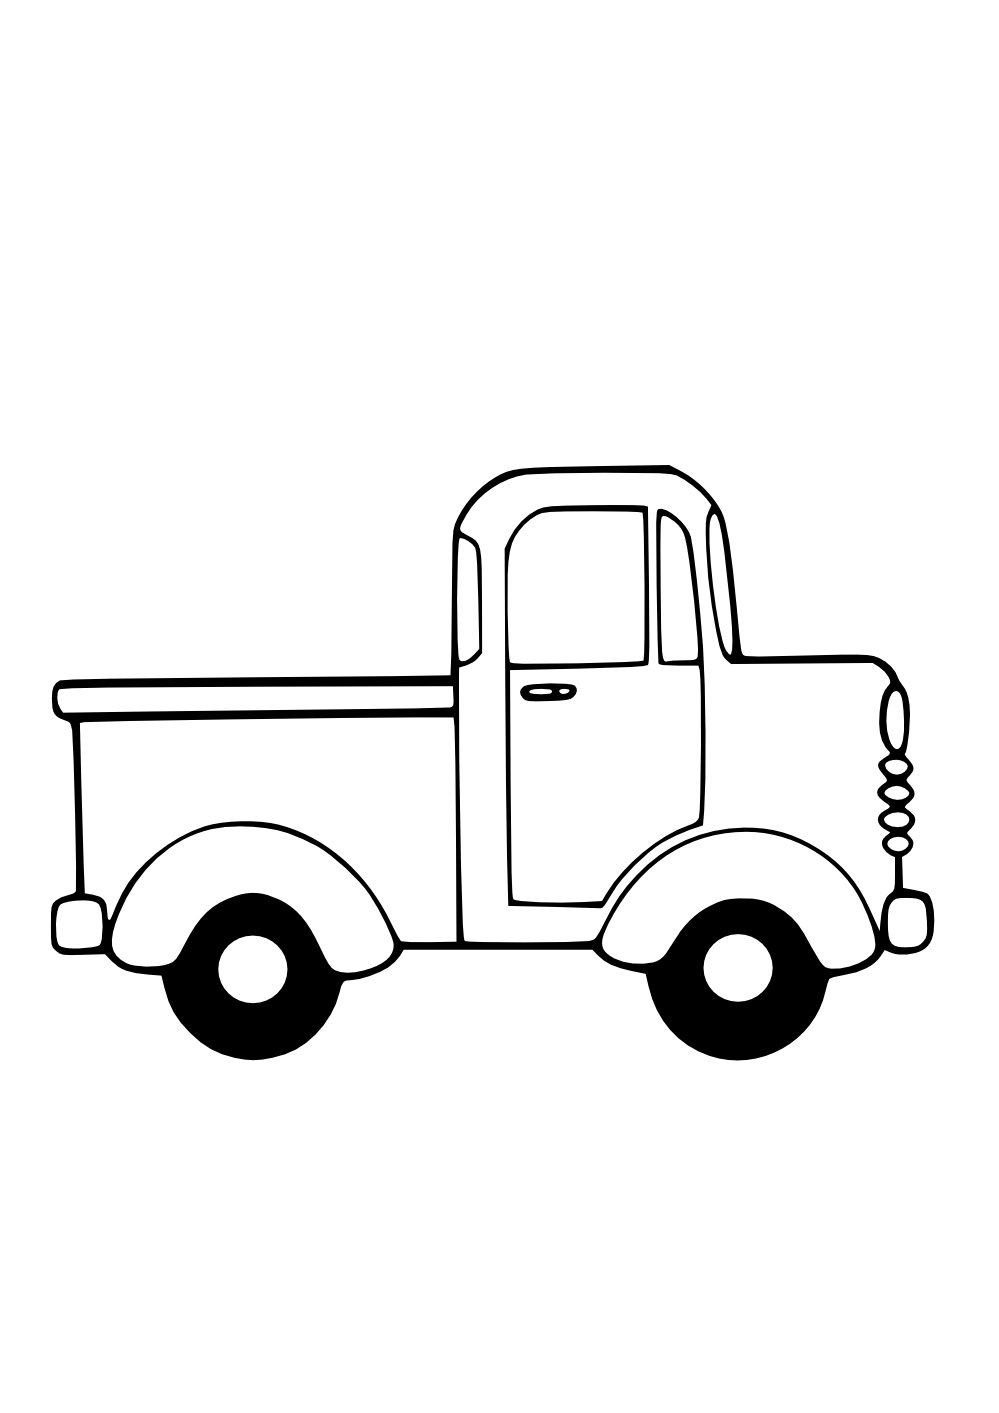 Toy clipart dumptruck. Truck black and white